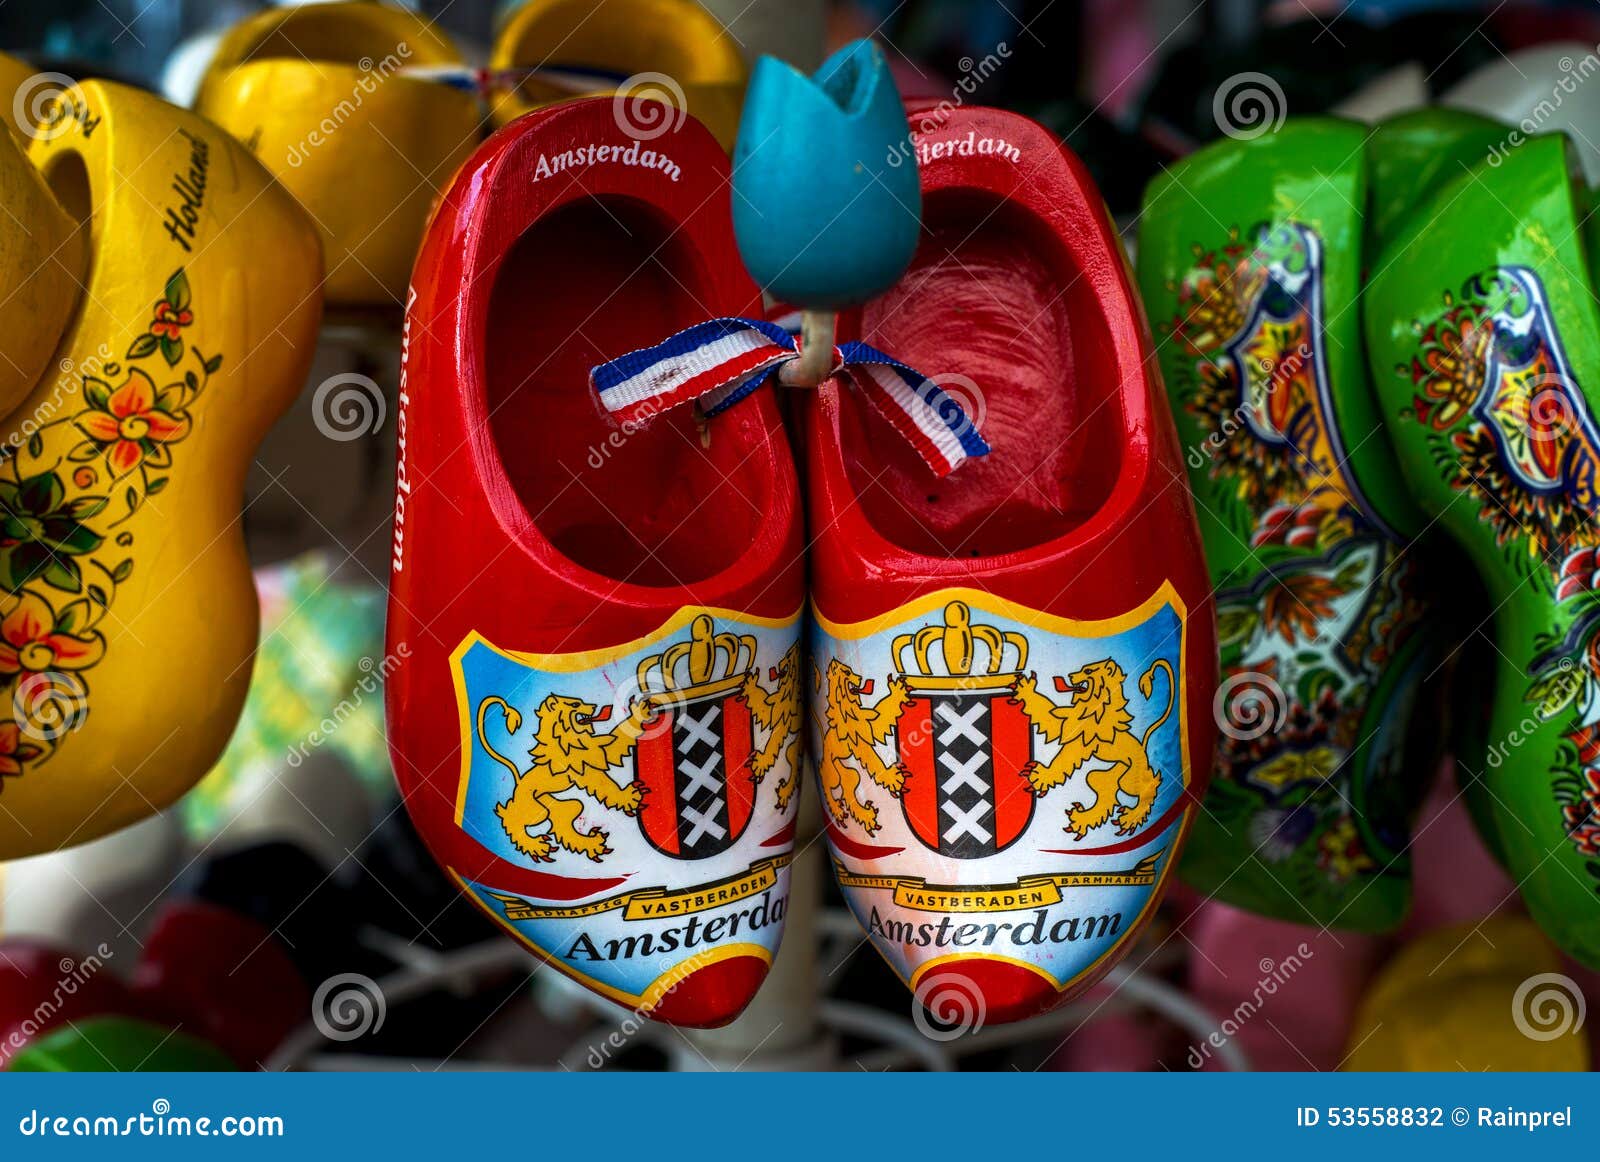 Wooden Shoes or CLogs (Klompen) in Amsterdam, the Netherlands Stock Photo -  Image of travel, store: 53558832